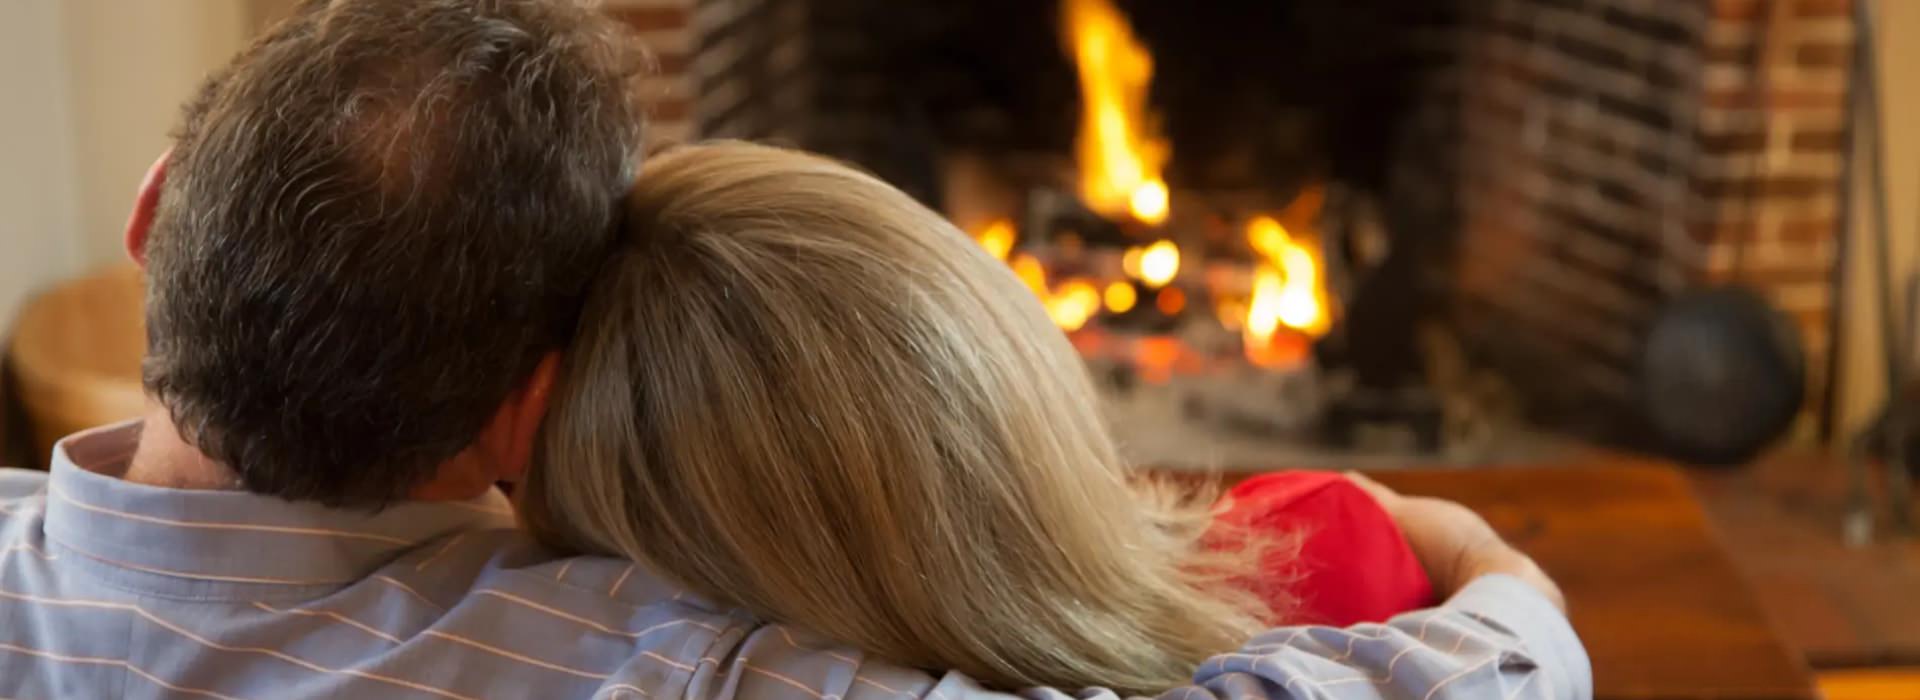 Close up view of the back of a man's and woman's heads as they cuddle next to a burning fireplace